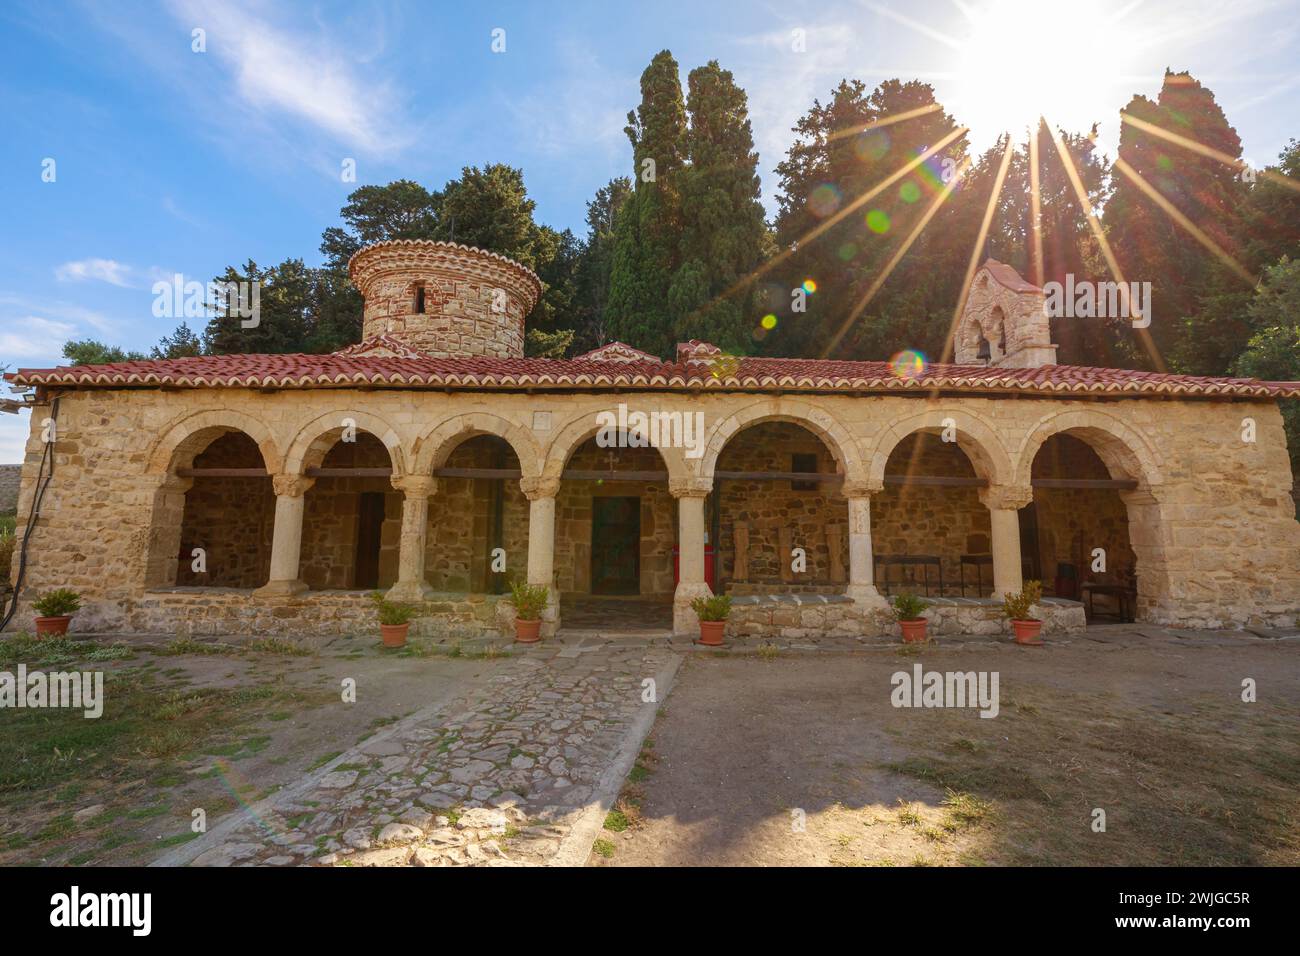 The Saint Mary's Monastery on Zvernec island in Albania is culturally and religiously important. Its origins date back to the 13th century, making it Stock Photo